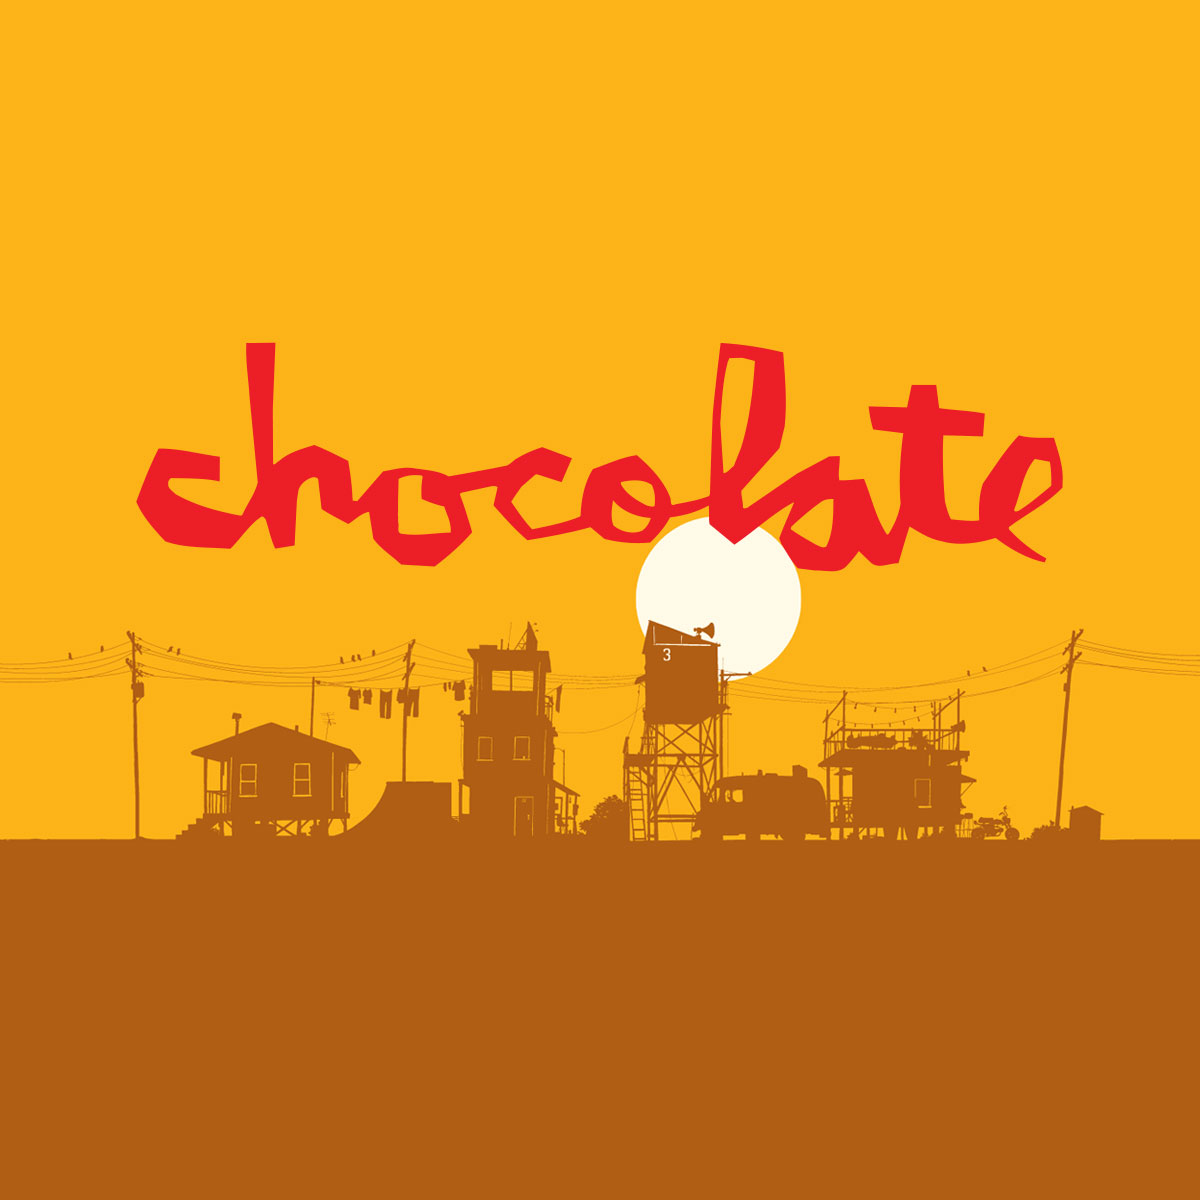 Chocolate Skateboards Wallpapers